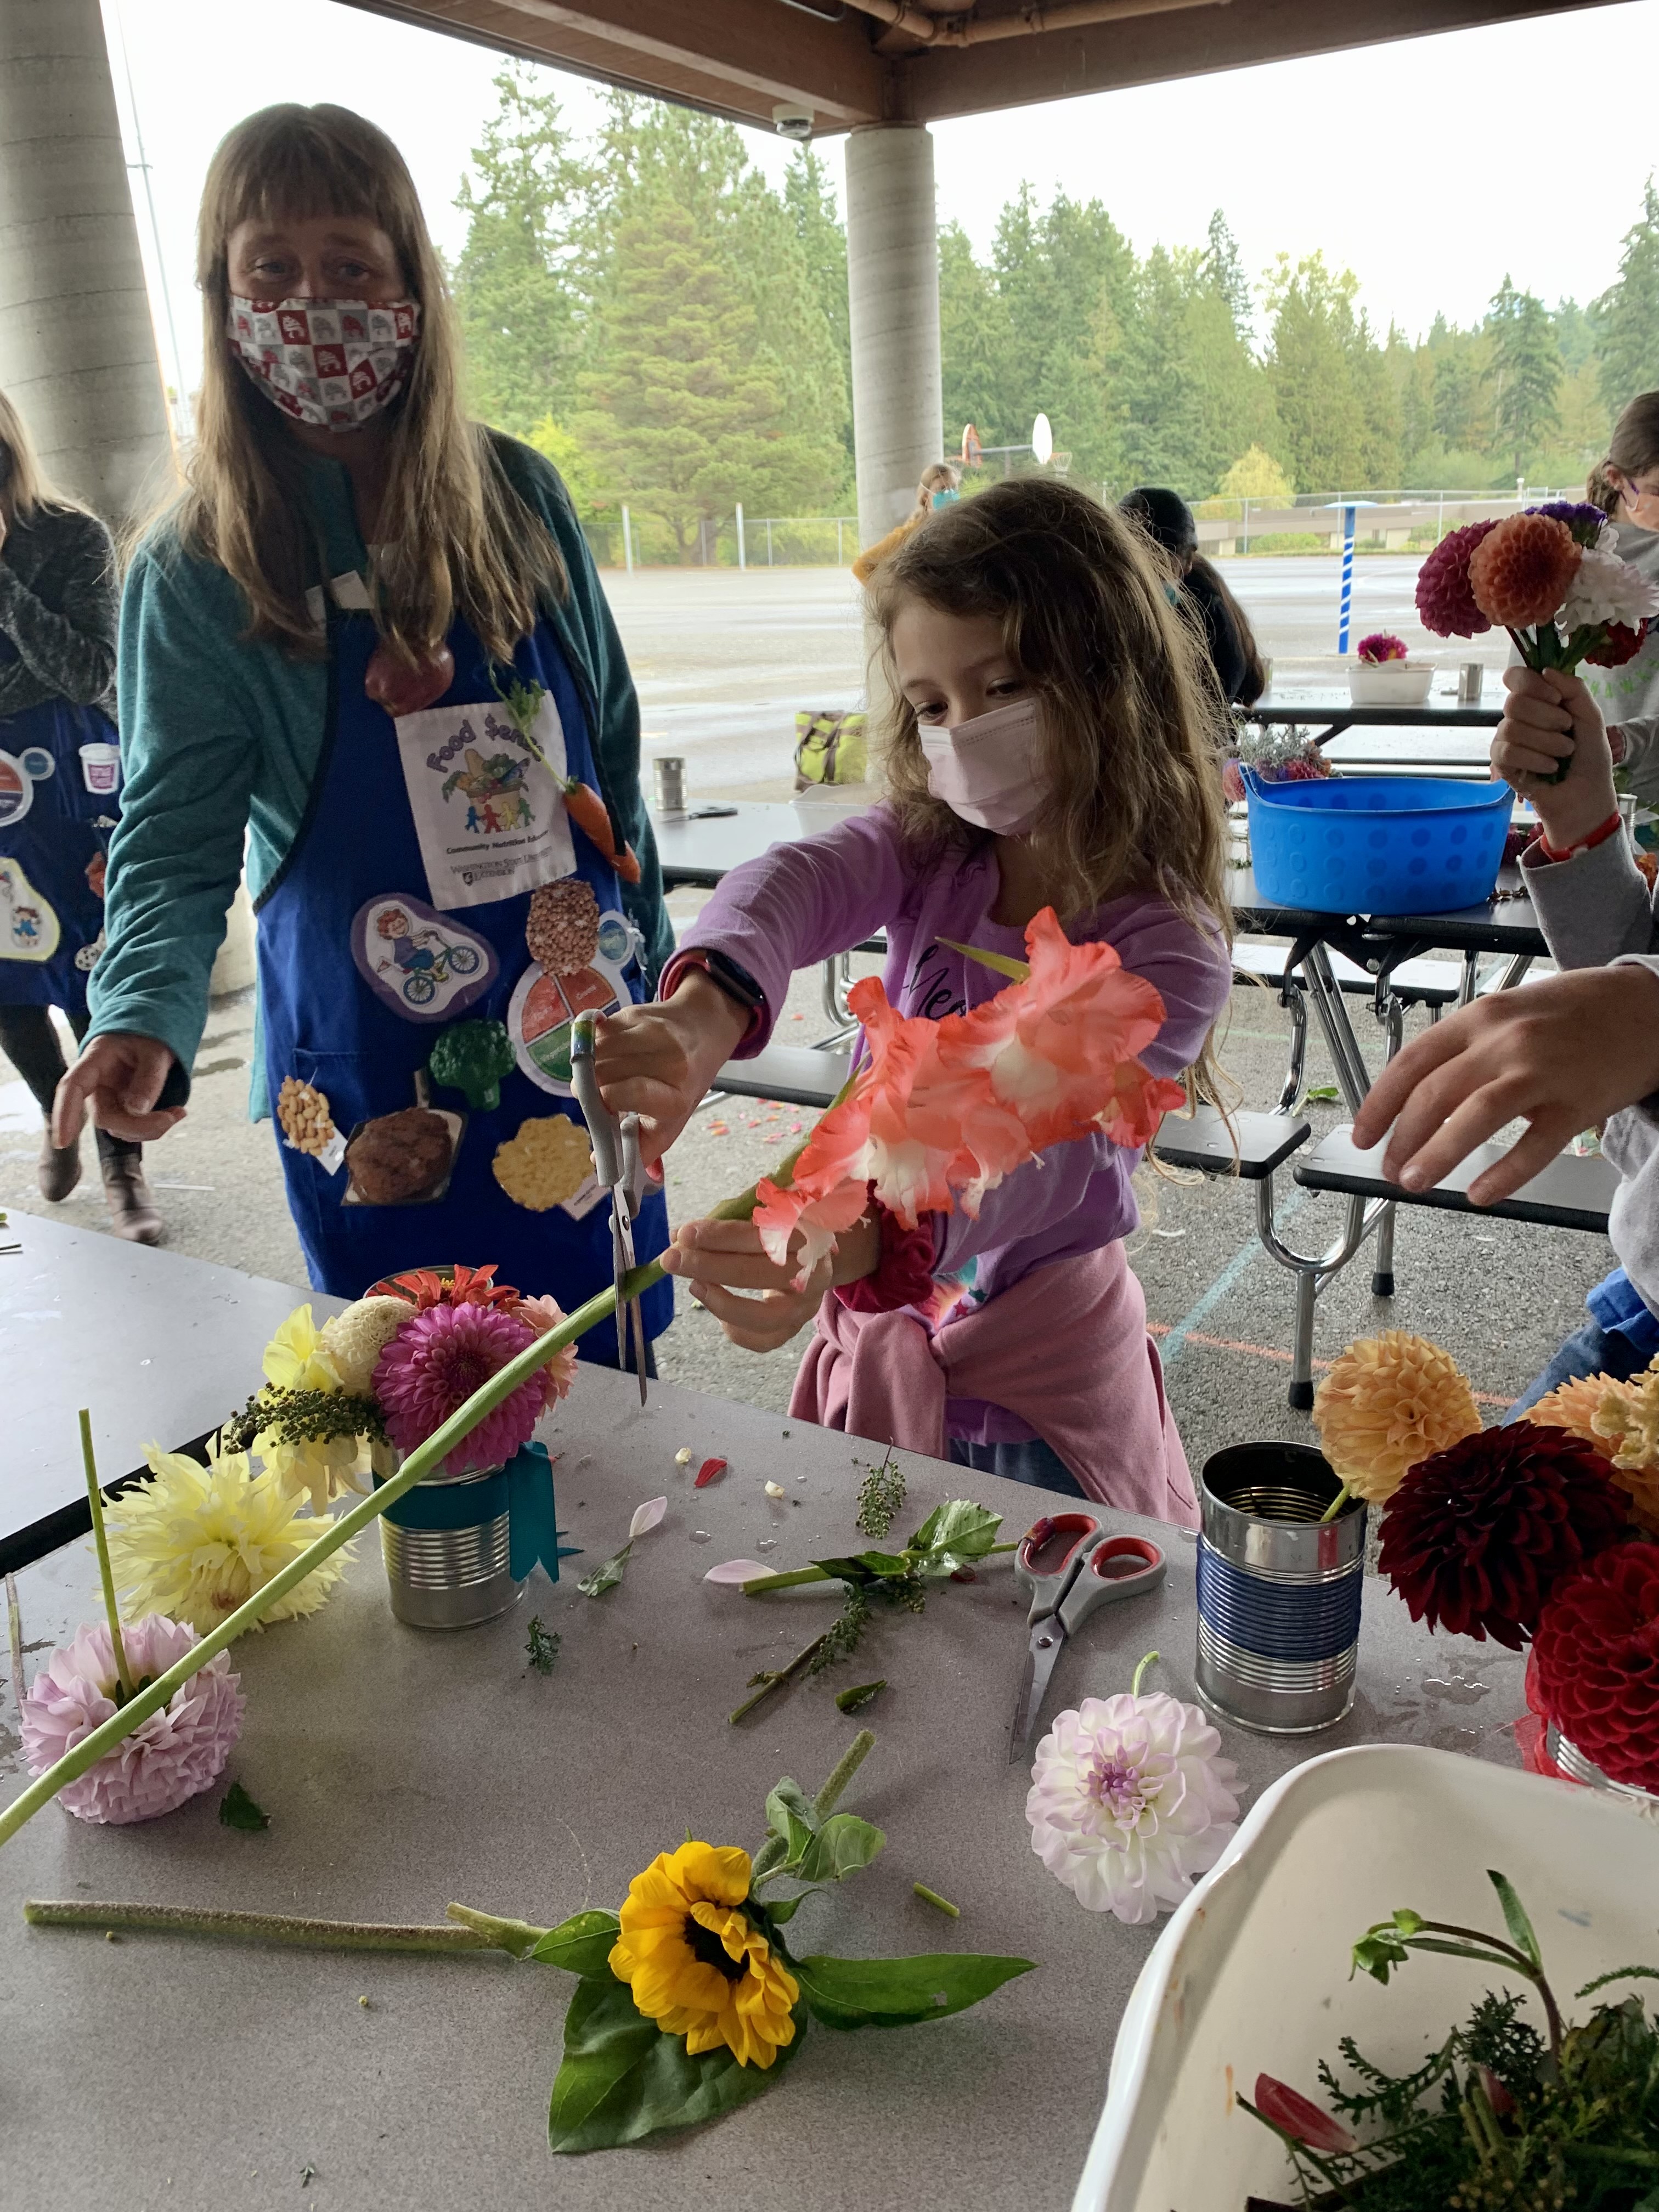 Student learning how to cut stems off flowers for arrangements.